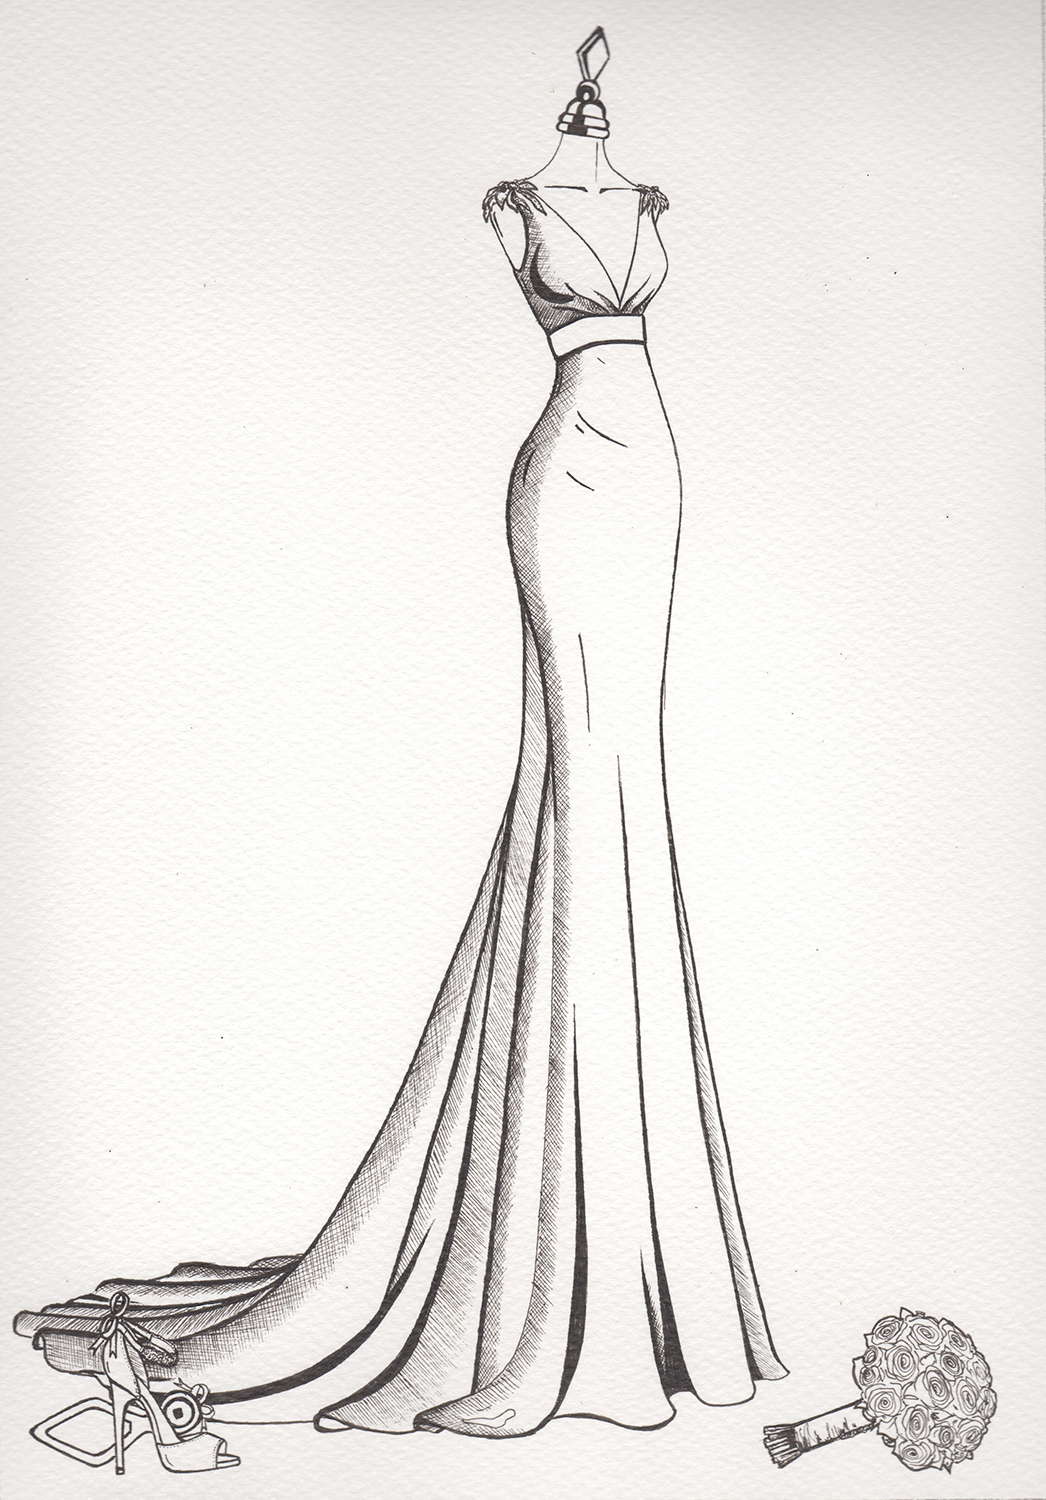 Wedding Dress Sketches Designs at PaintingValley.com | Explore ...